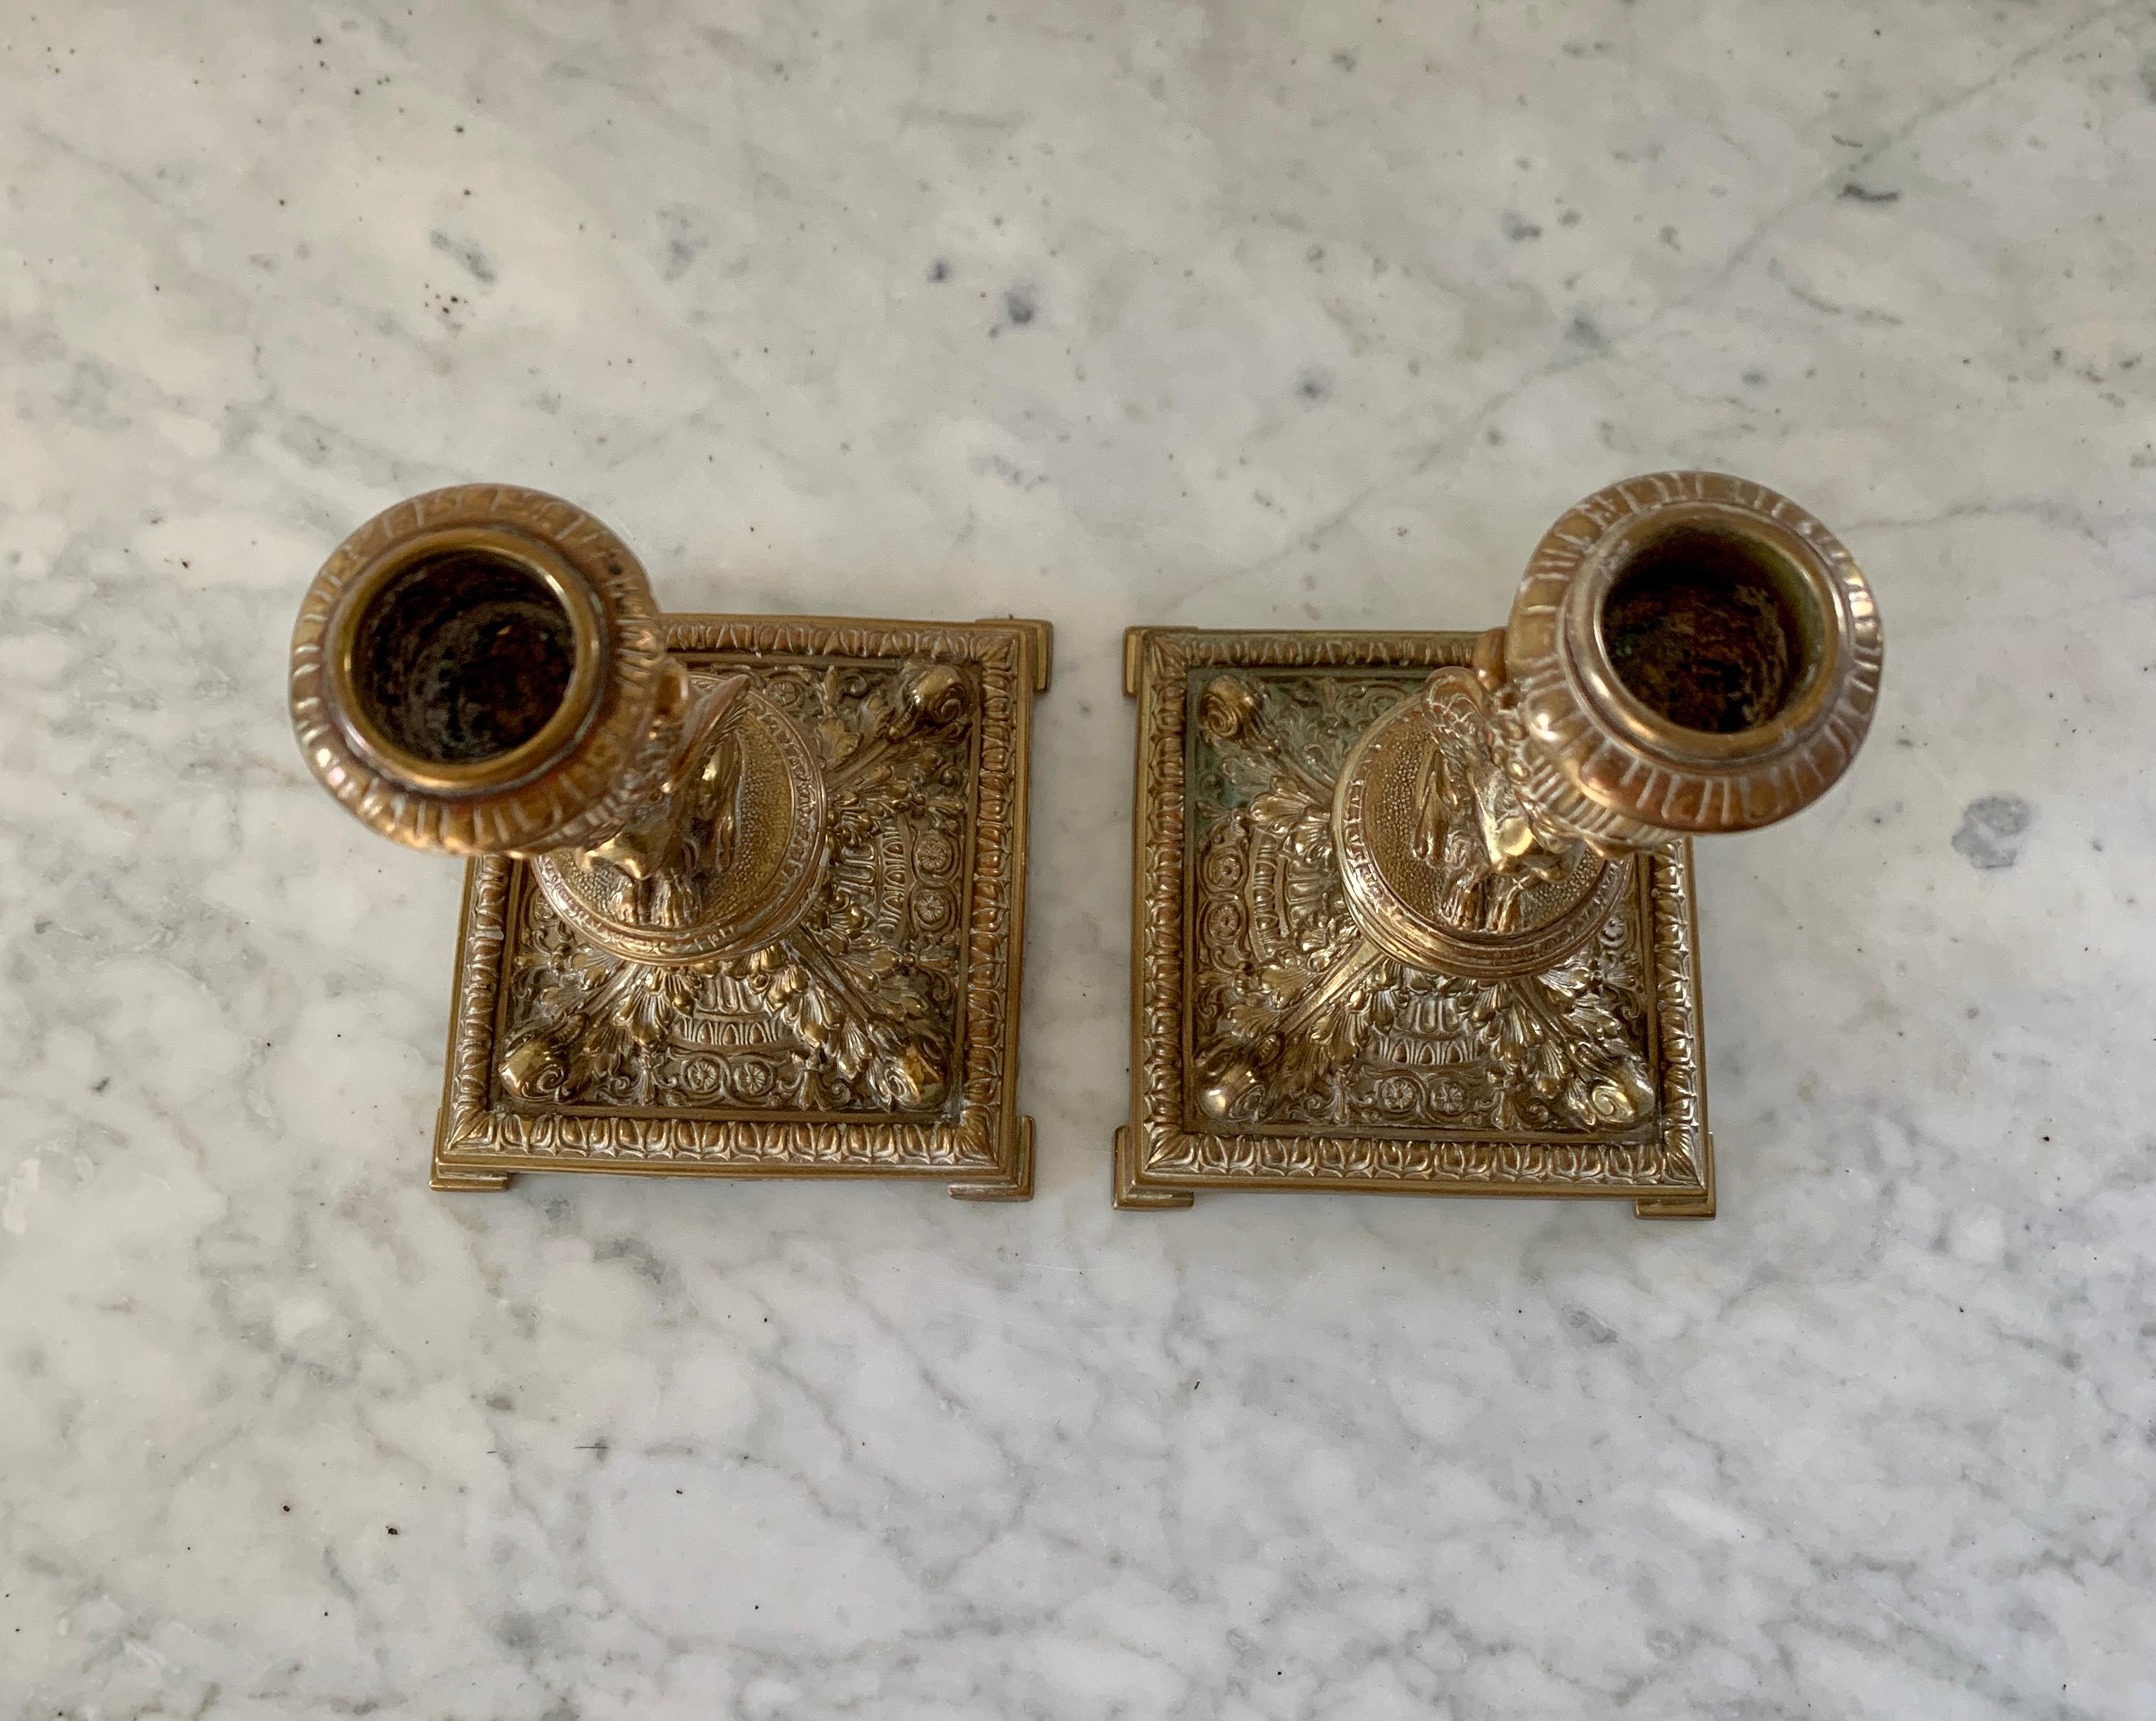 19th Century Egyptian Revival Gilt Bronze Sphinx Candlestick Holders, Pair For Sale 8